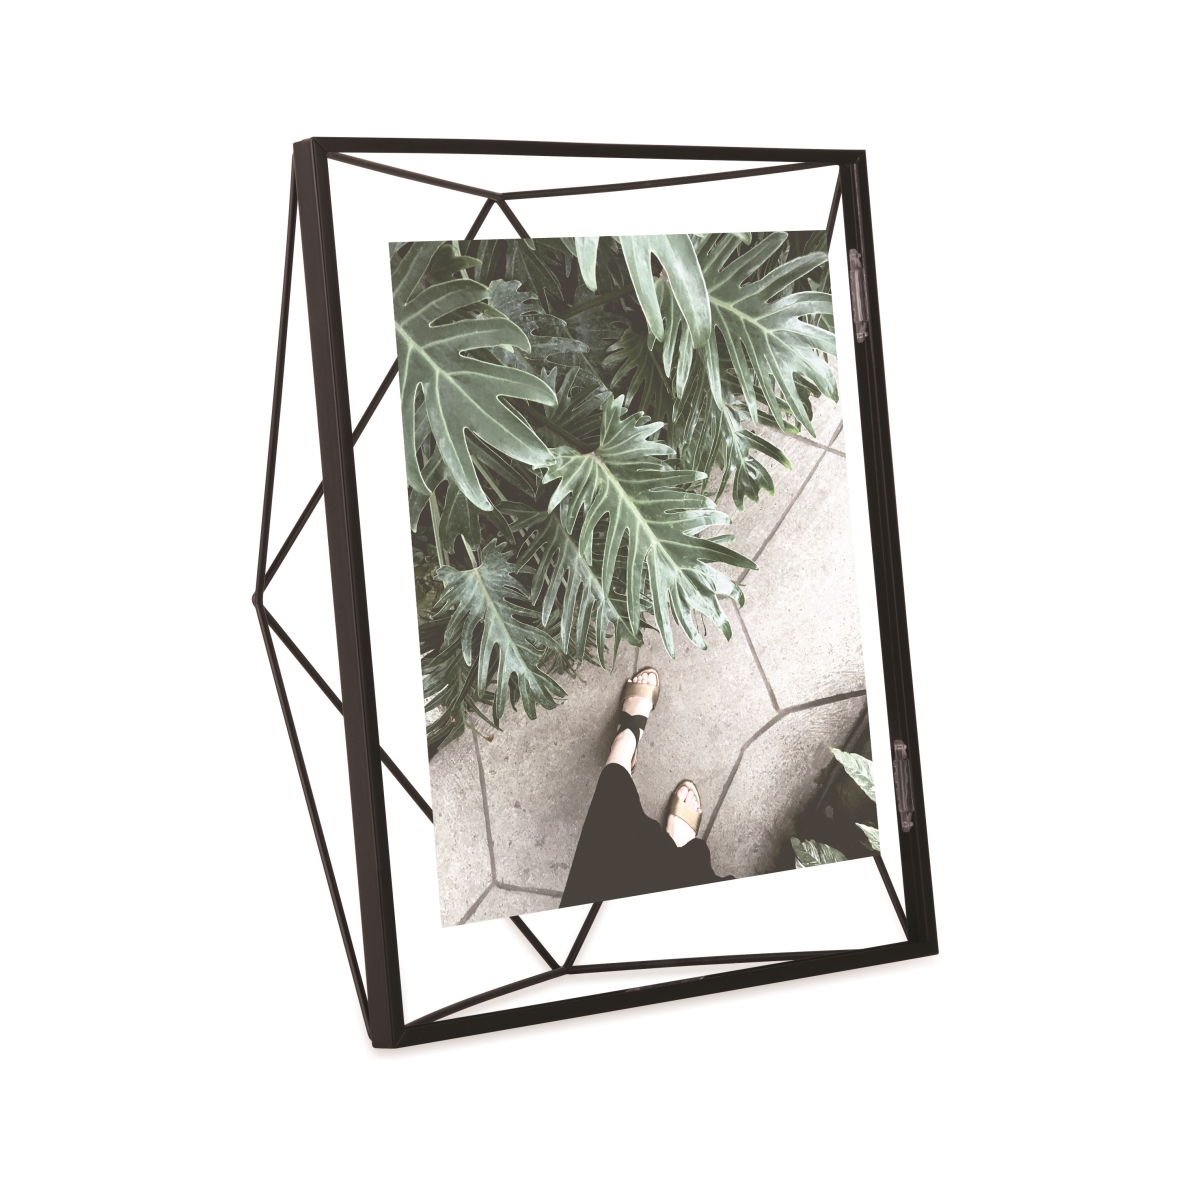 313018-040 8 X 10 In. Prisma Picture Frame Floating Wall Or Desk Photo Display -black